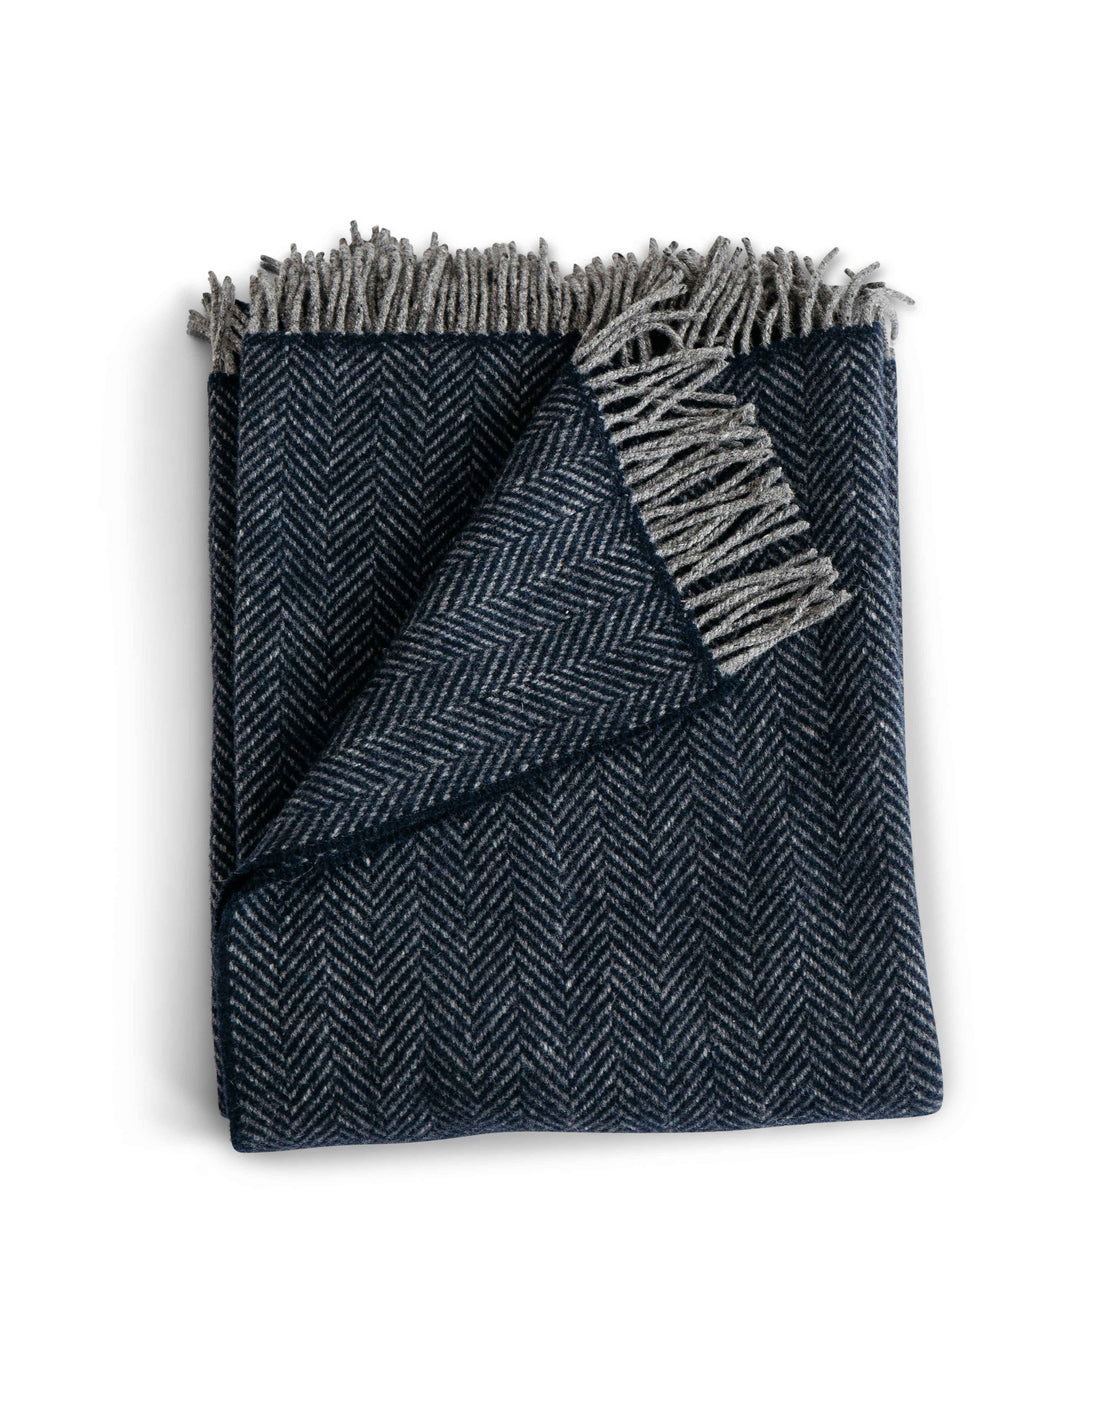 Folded Herringbone throw in Midnight a deep blue colored throw with grey fringe detail. Timeless herringbone design. Super soft luster of cashmere. cozy comfort of merino wool. A chunky and cuddly classic. 95% Merino Lambswool and 5% Cashmere. Woven in Ireland.